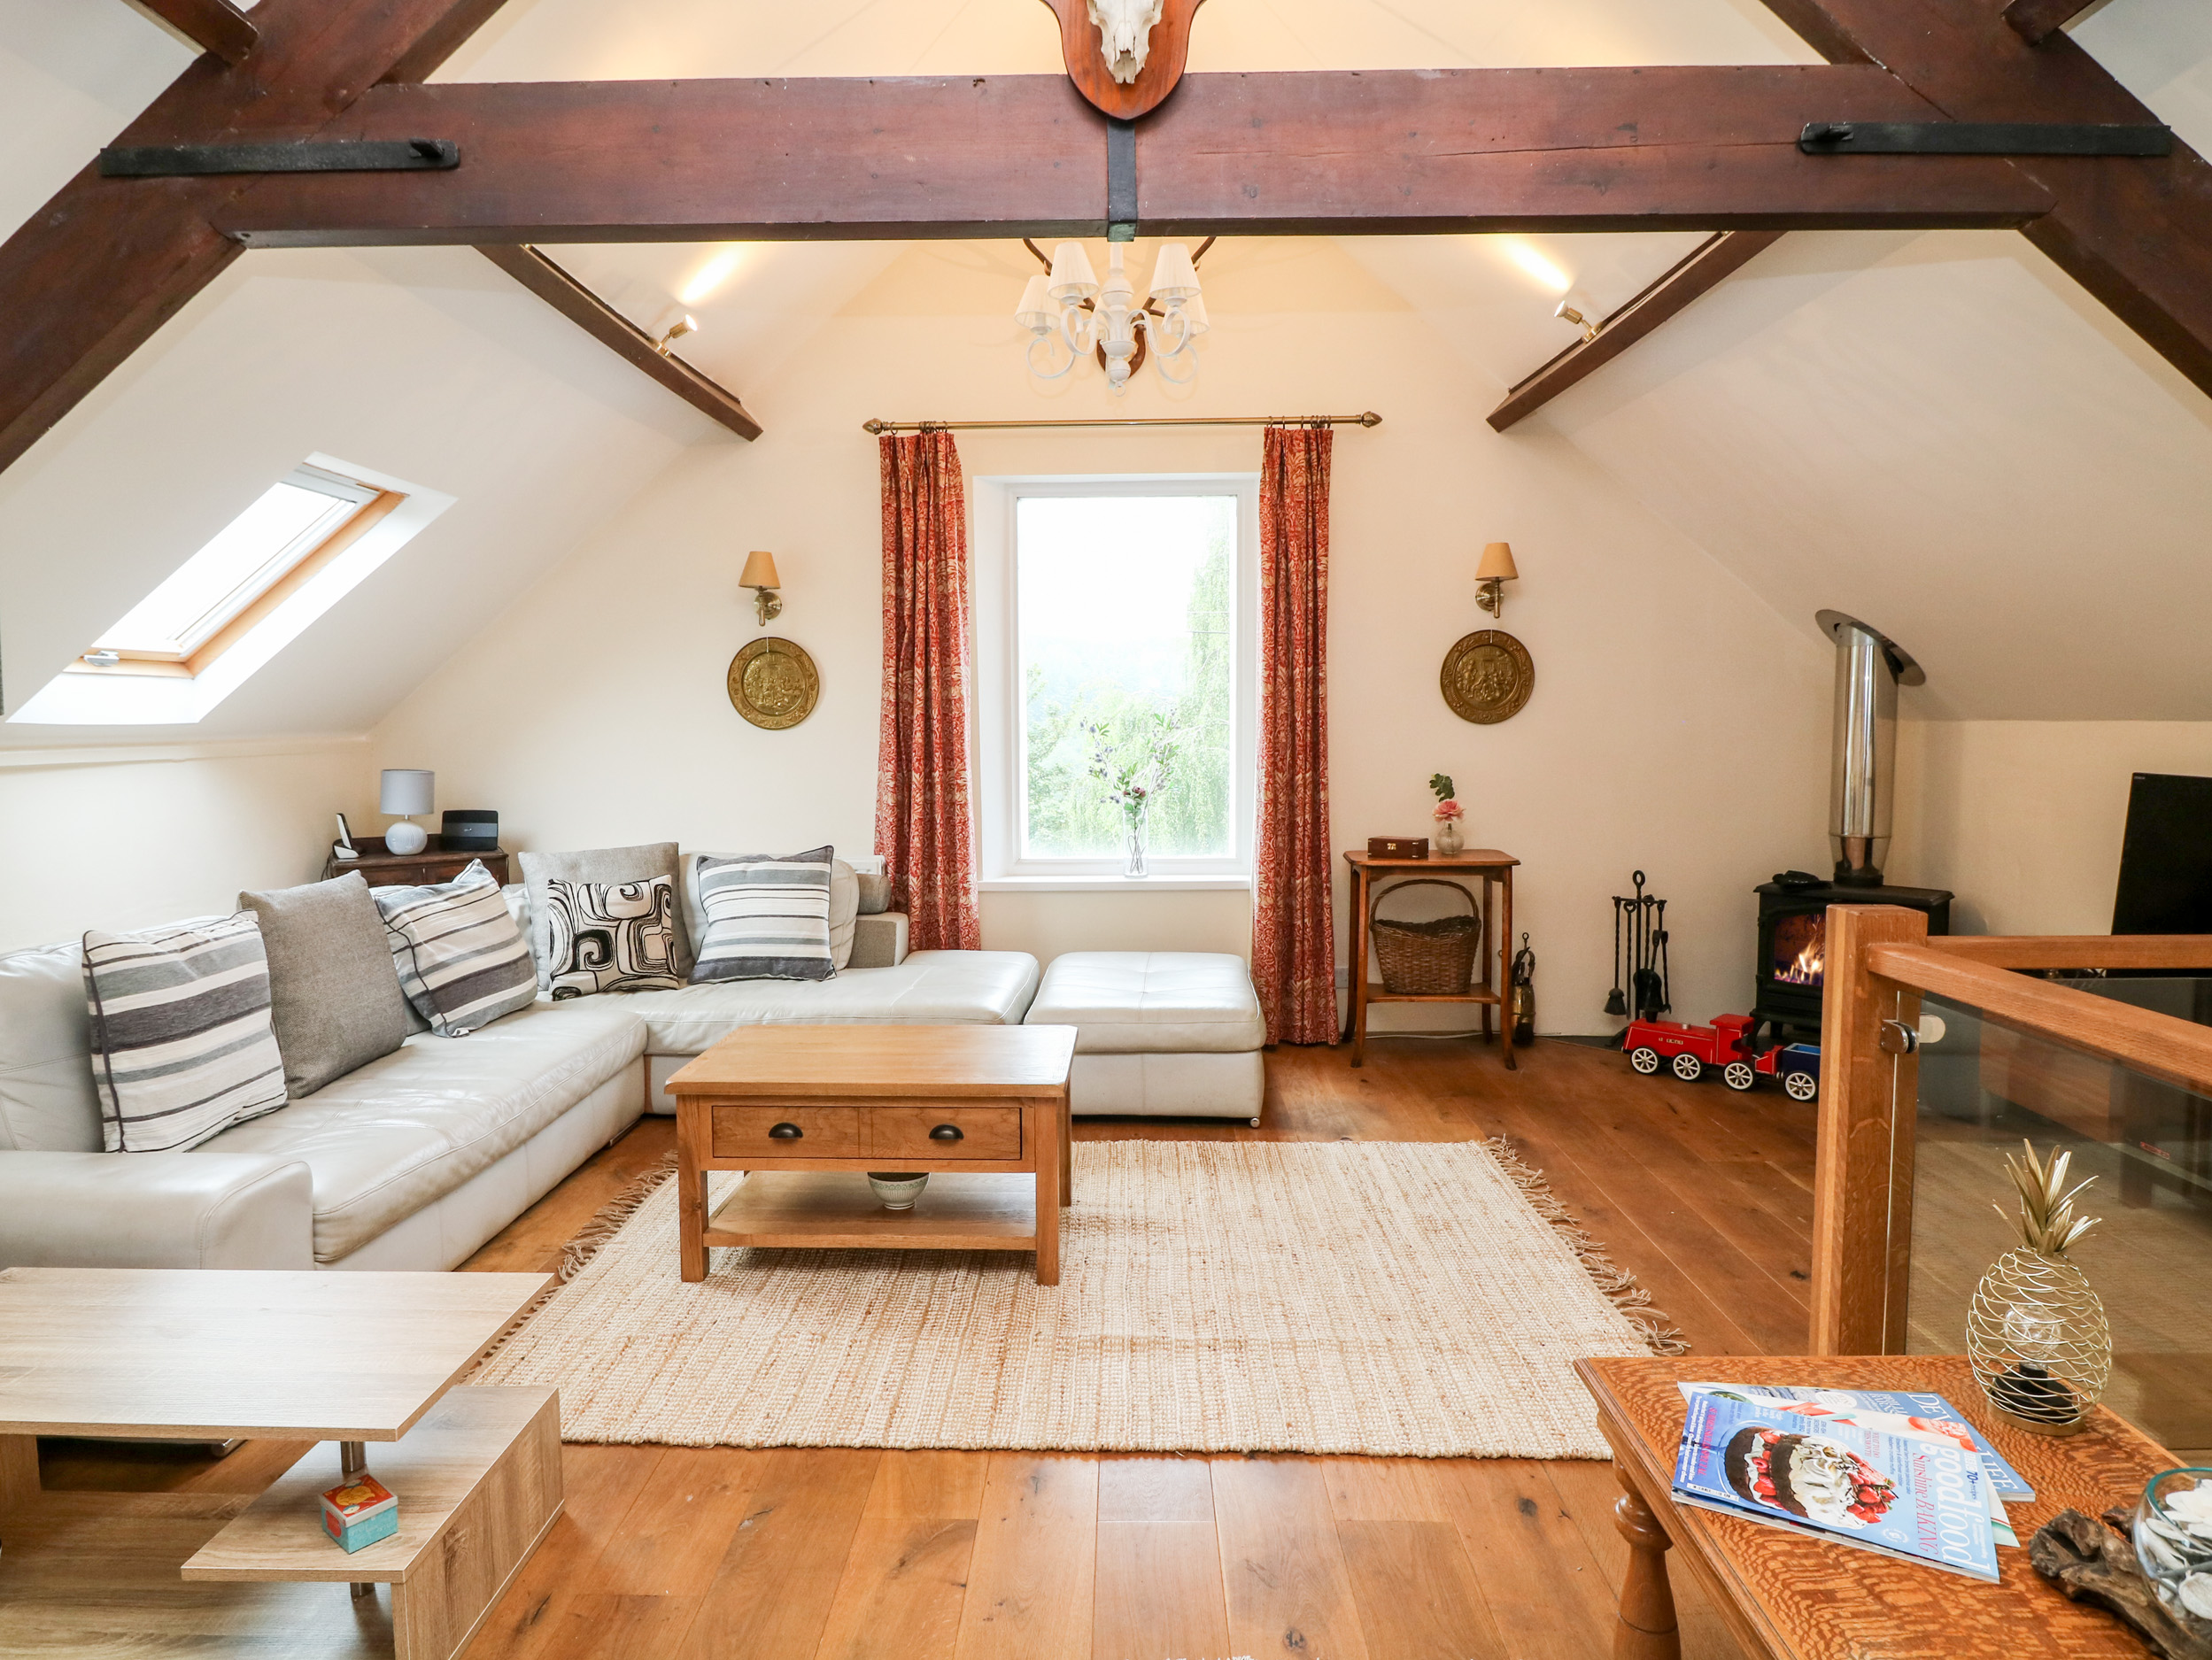 3 bedroom Cottage for rent in Chagford